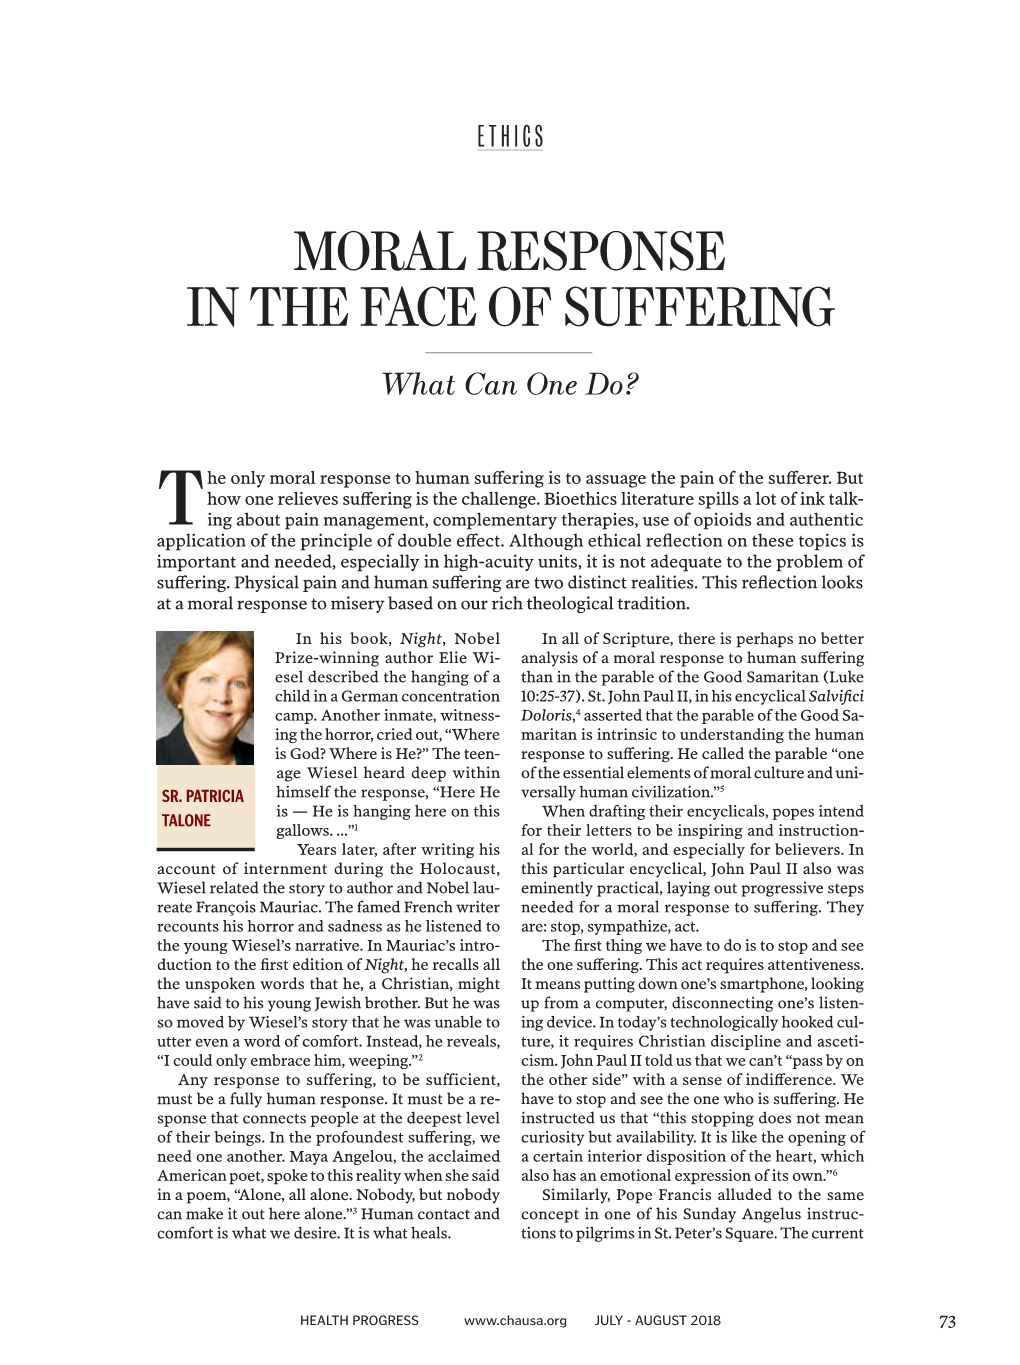 Ethics-Moral Response in the Face of Suffering